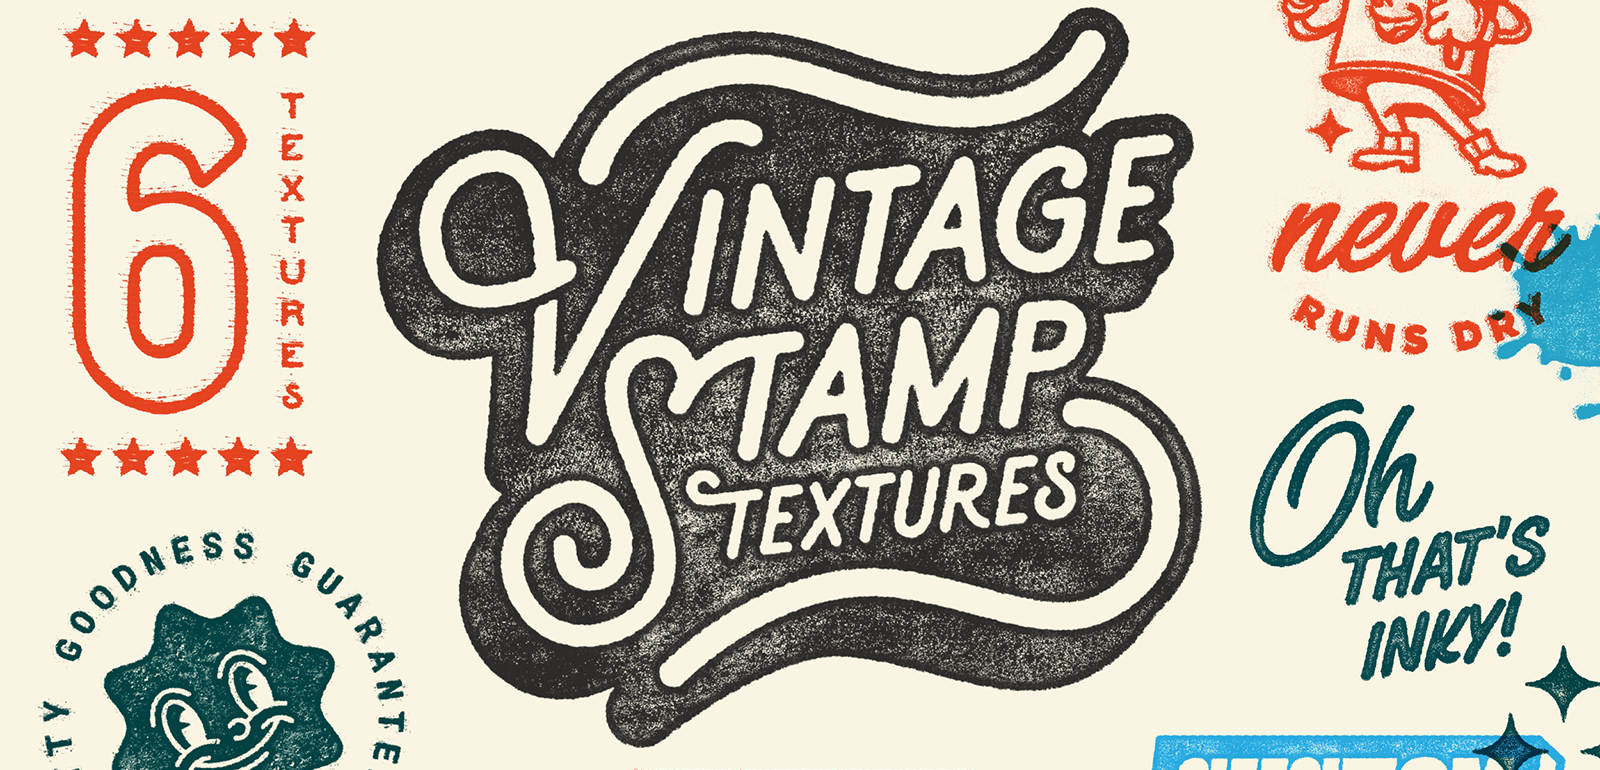 Retro-inspired mockup featuring vintage stamp textures with bold typography, designed for Photoshop & Affinity, perfect for graphic designers.